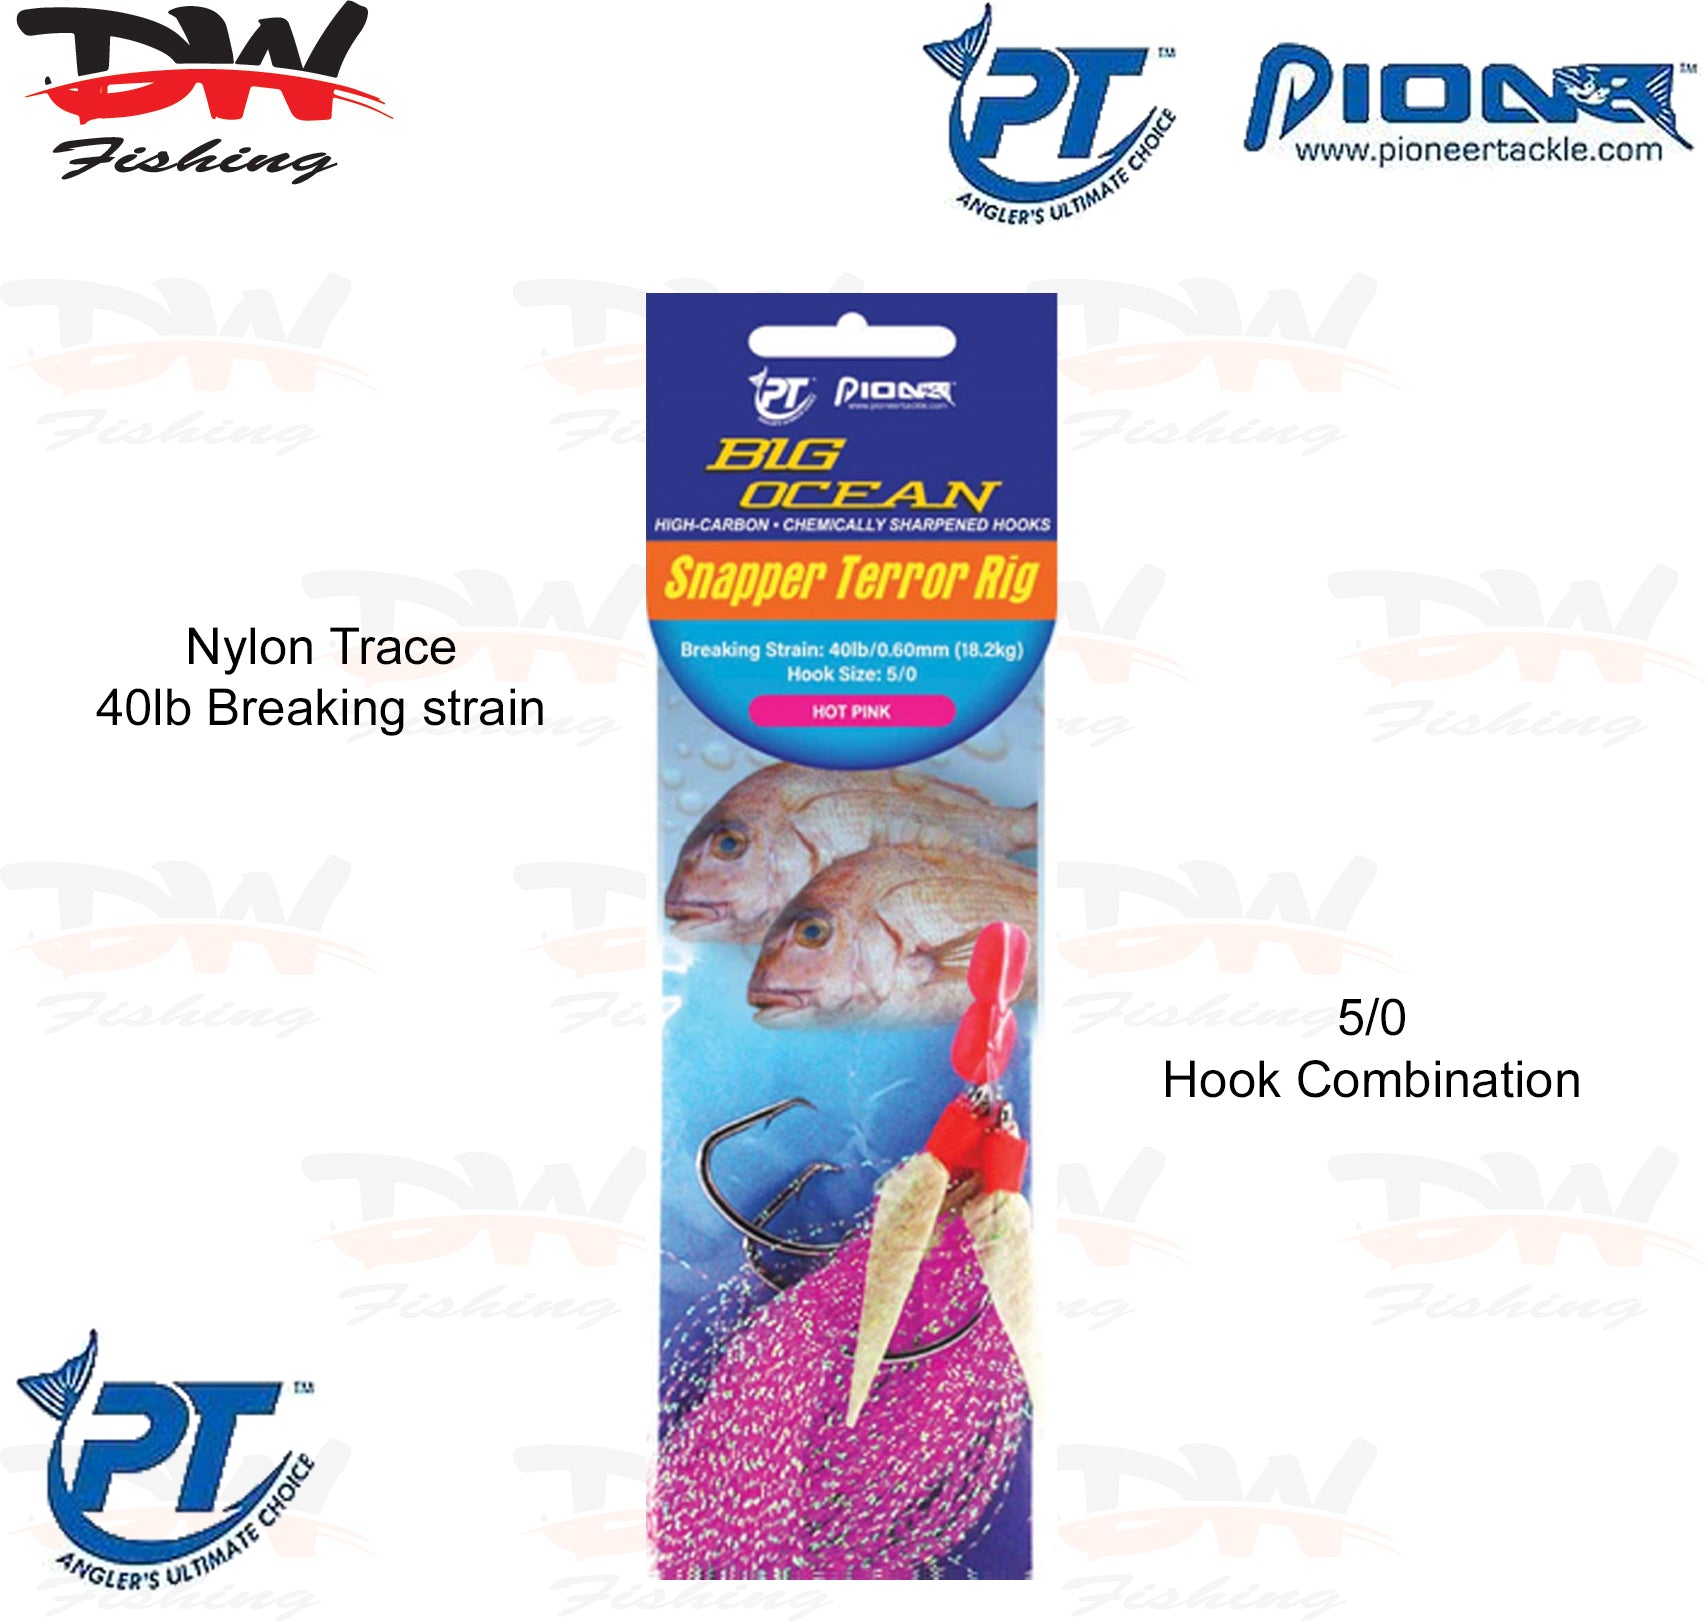 Snapper snatcher by Pioneer Tackle Big Ocean snapper terror rig Hot Pink colour with size 5/0 hooks